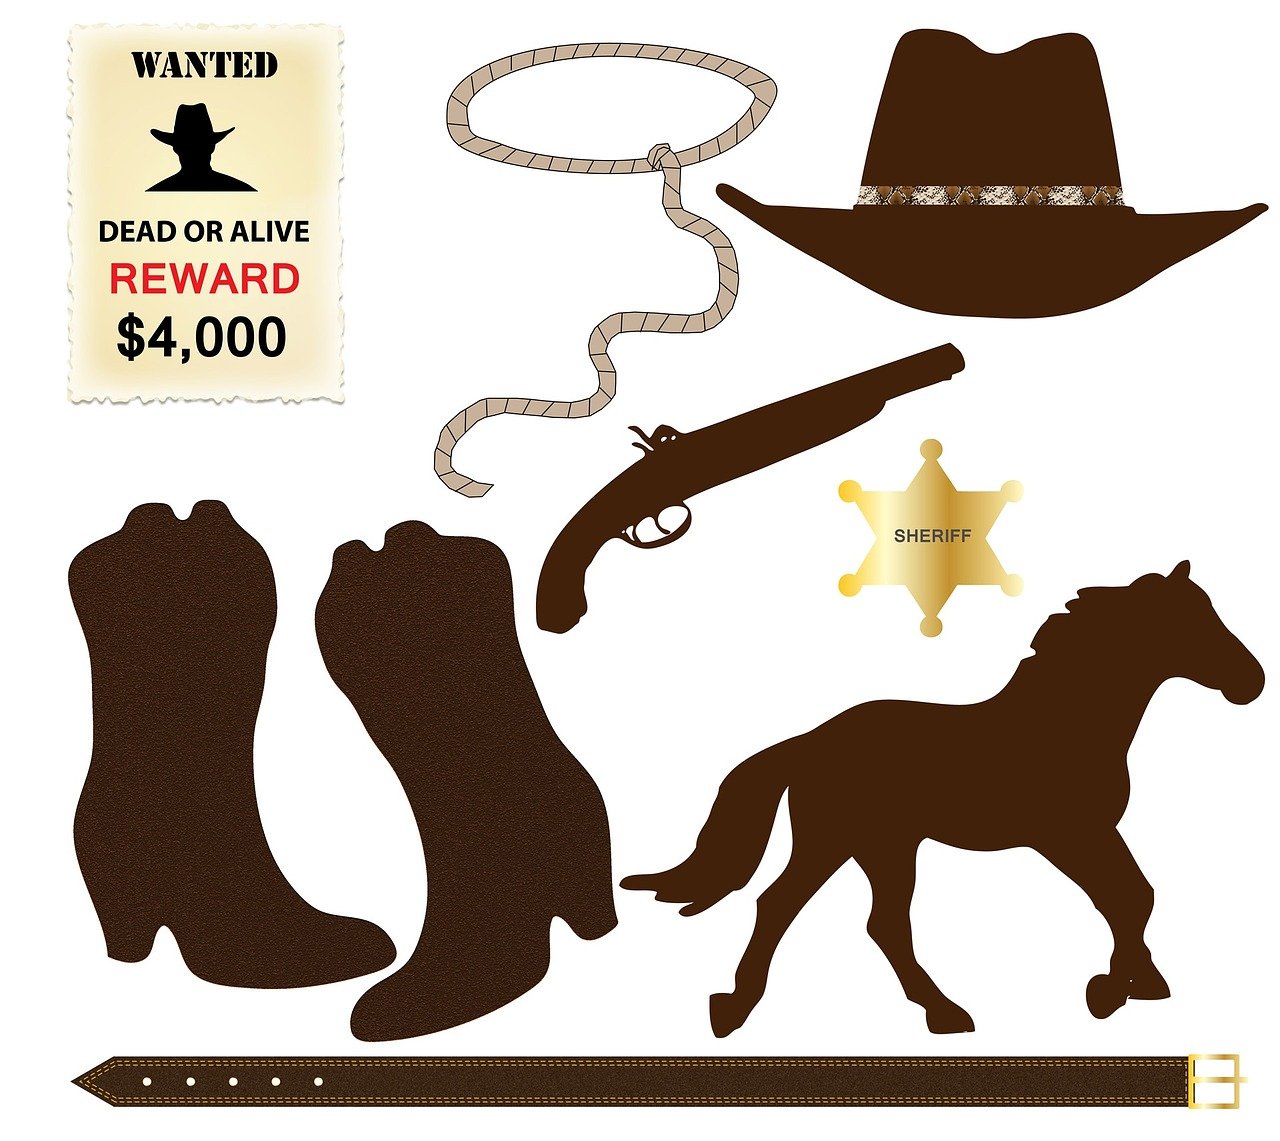 a pair of cowboy boots, a cowboy hat, a gun, and a sheriff badge, an illustration of, wanted poster, various pose, black gloves!! and boots, arabian